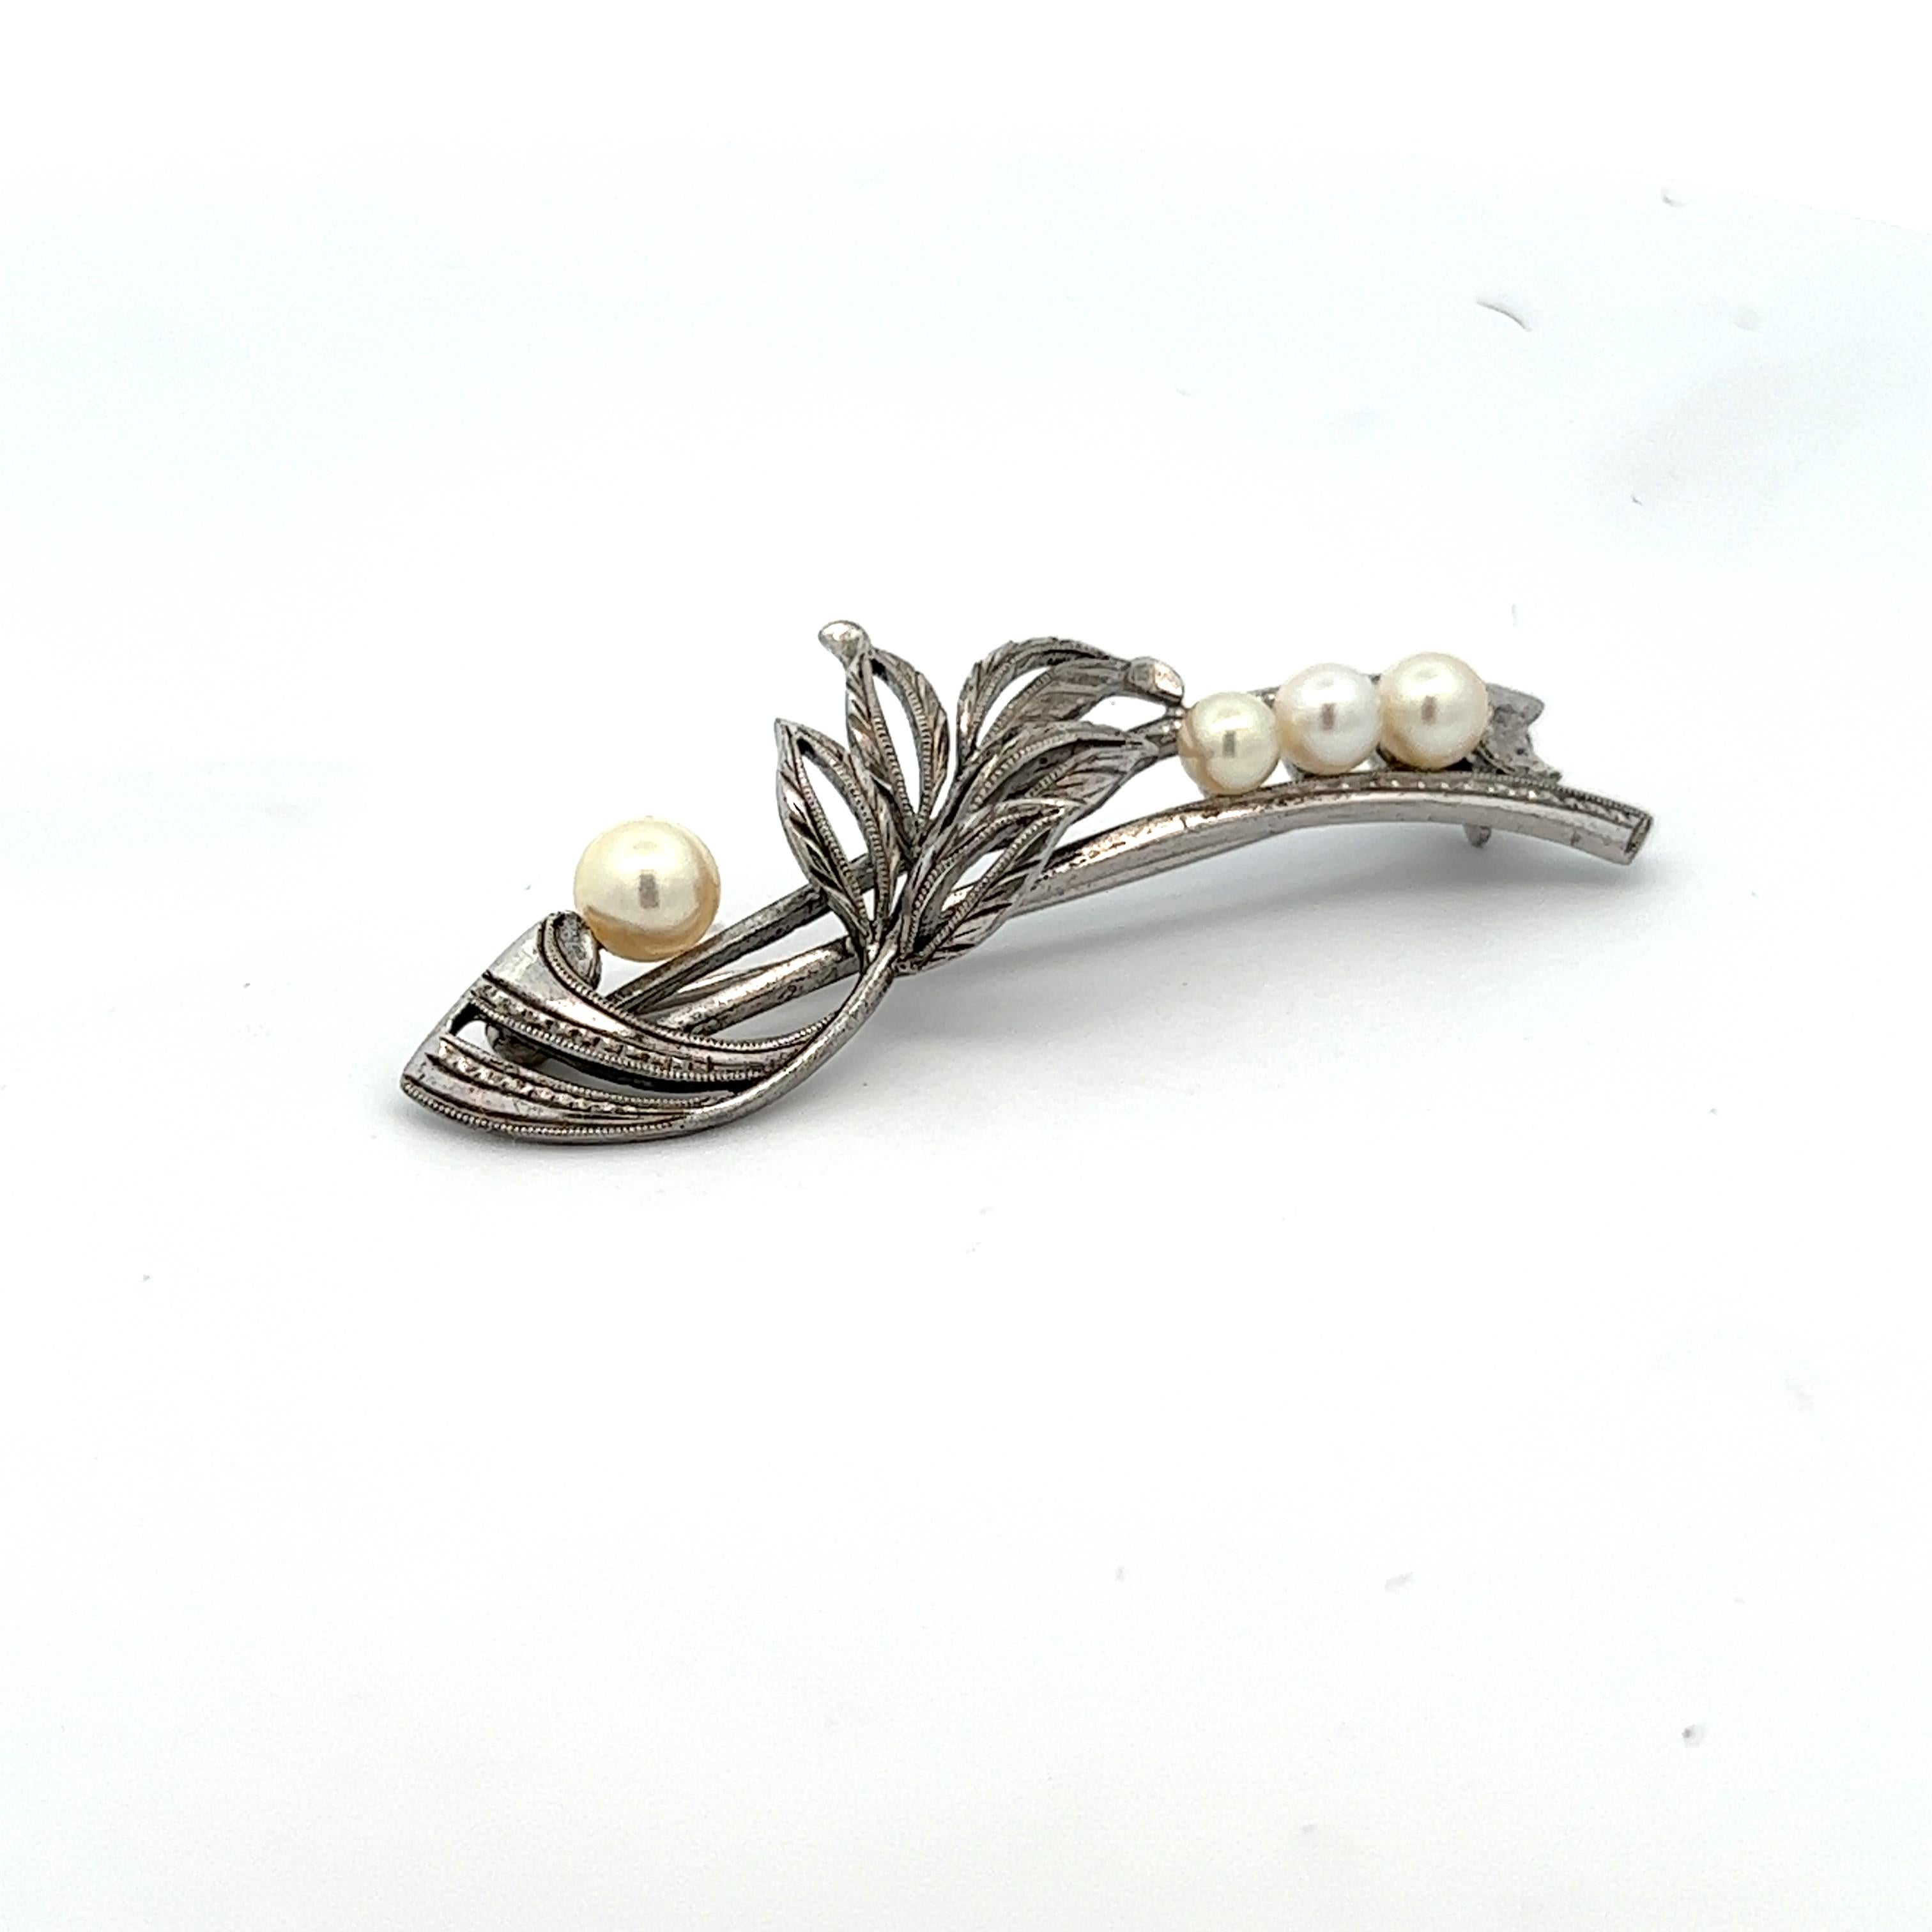 1950s Retro Mikimoto Pearl Brooch Sterling Silver  In Excellent Condition For Sale In Lexington, KY